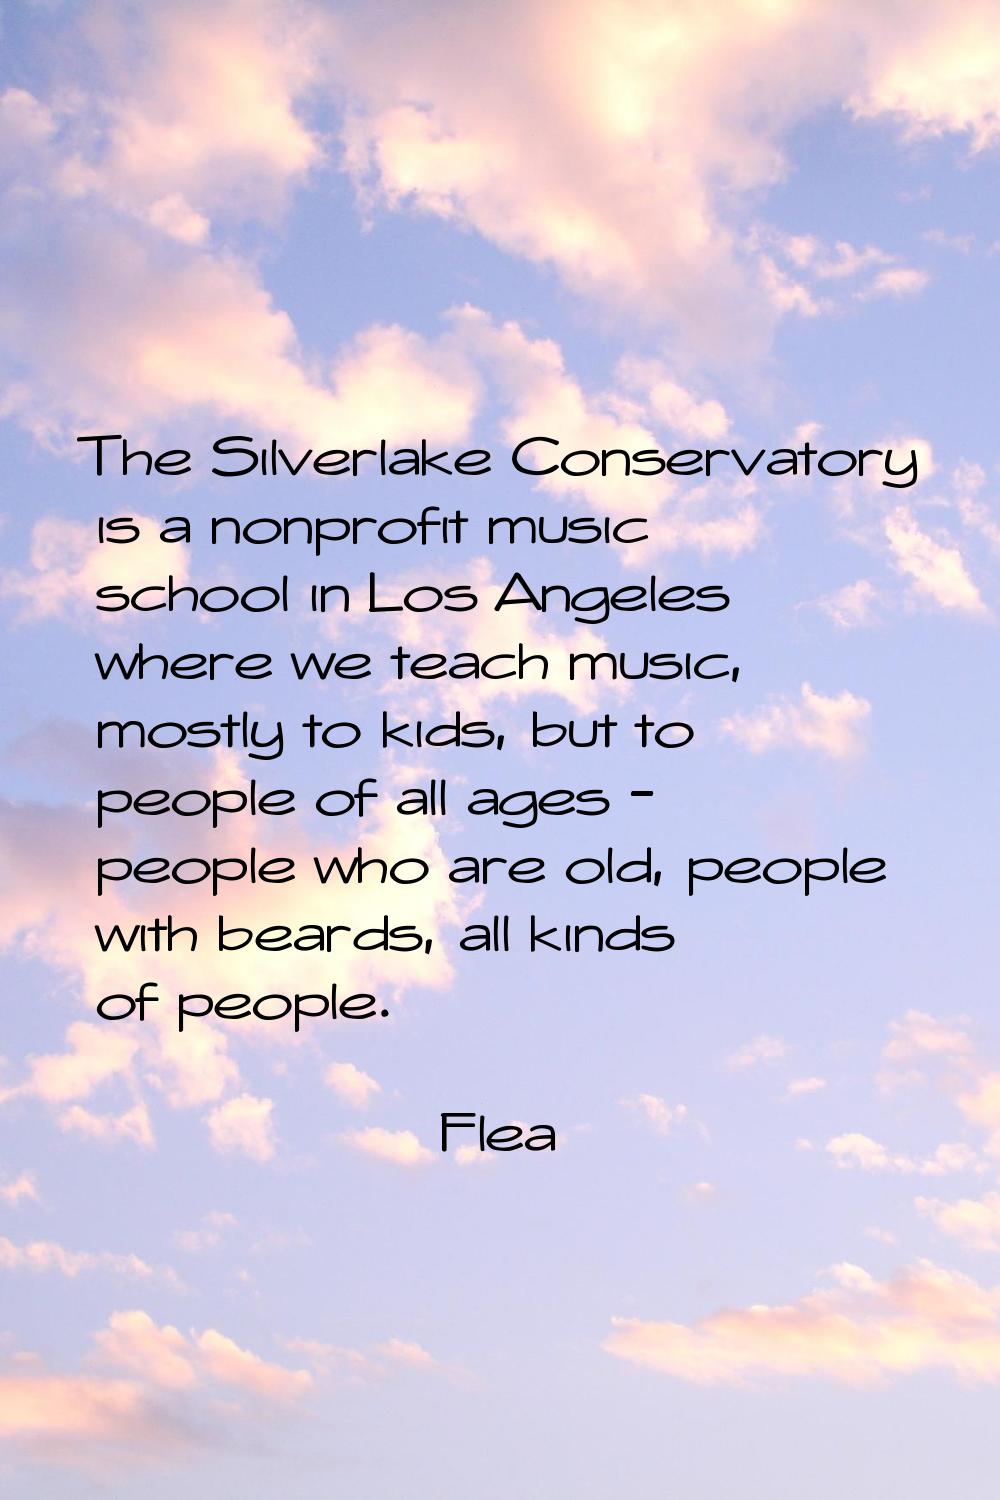 The Silverlake Conservatory is a nonprofit music school in Los Angeles where we teach music, mostly